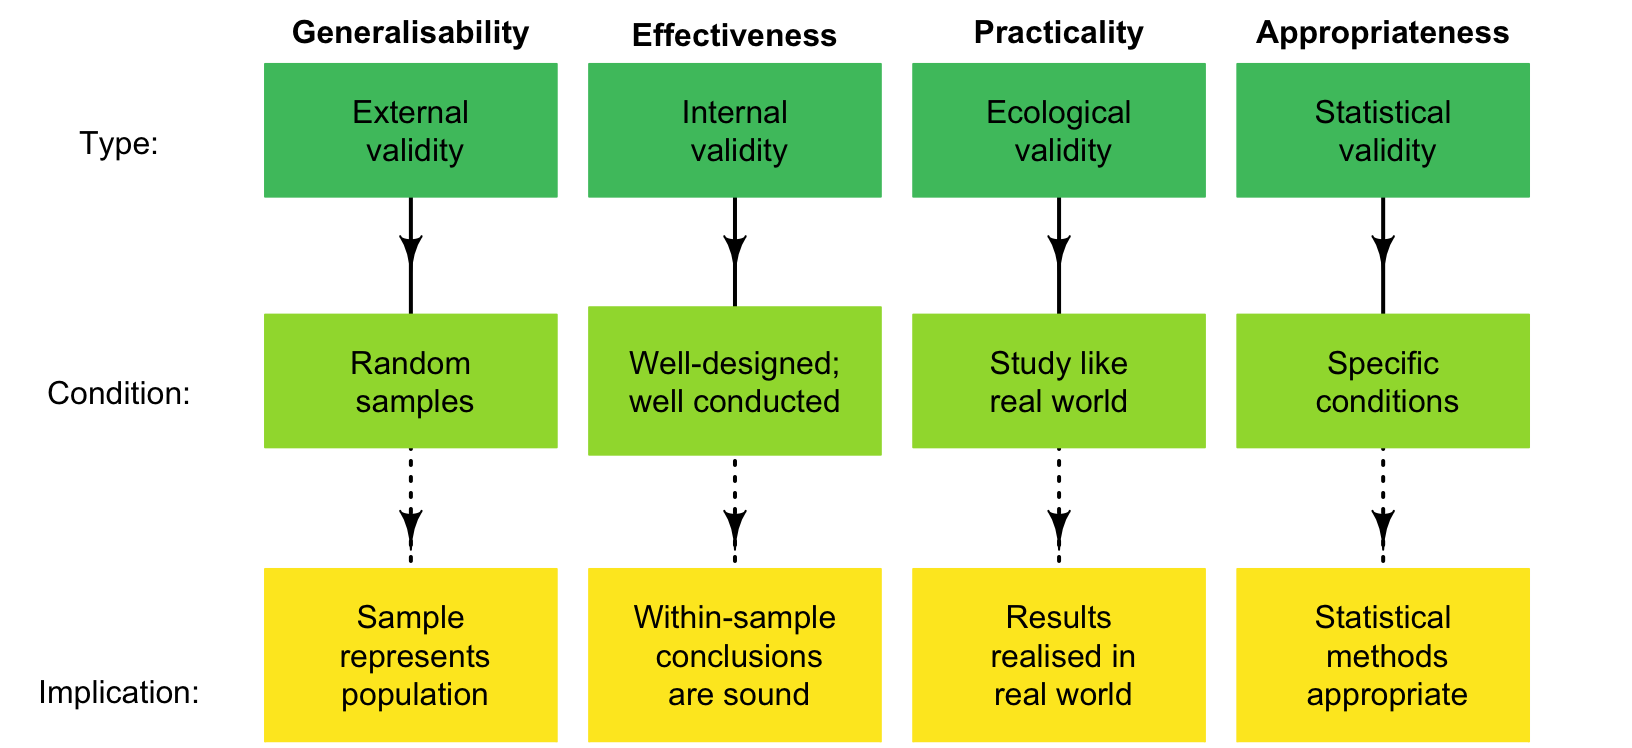 Four types of validities for studies.